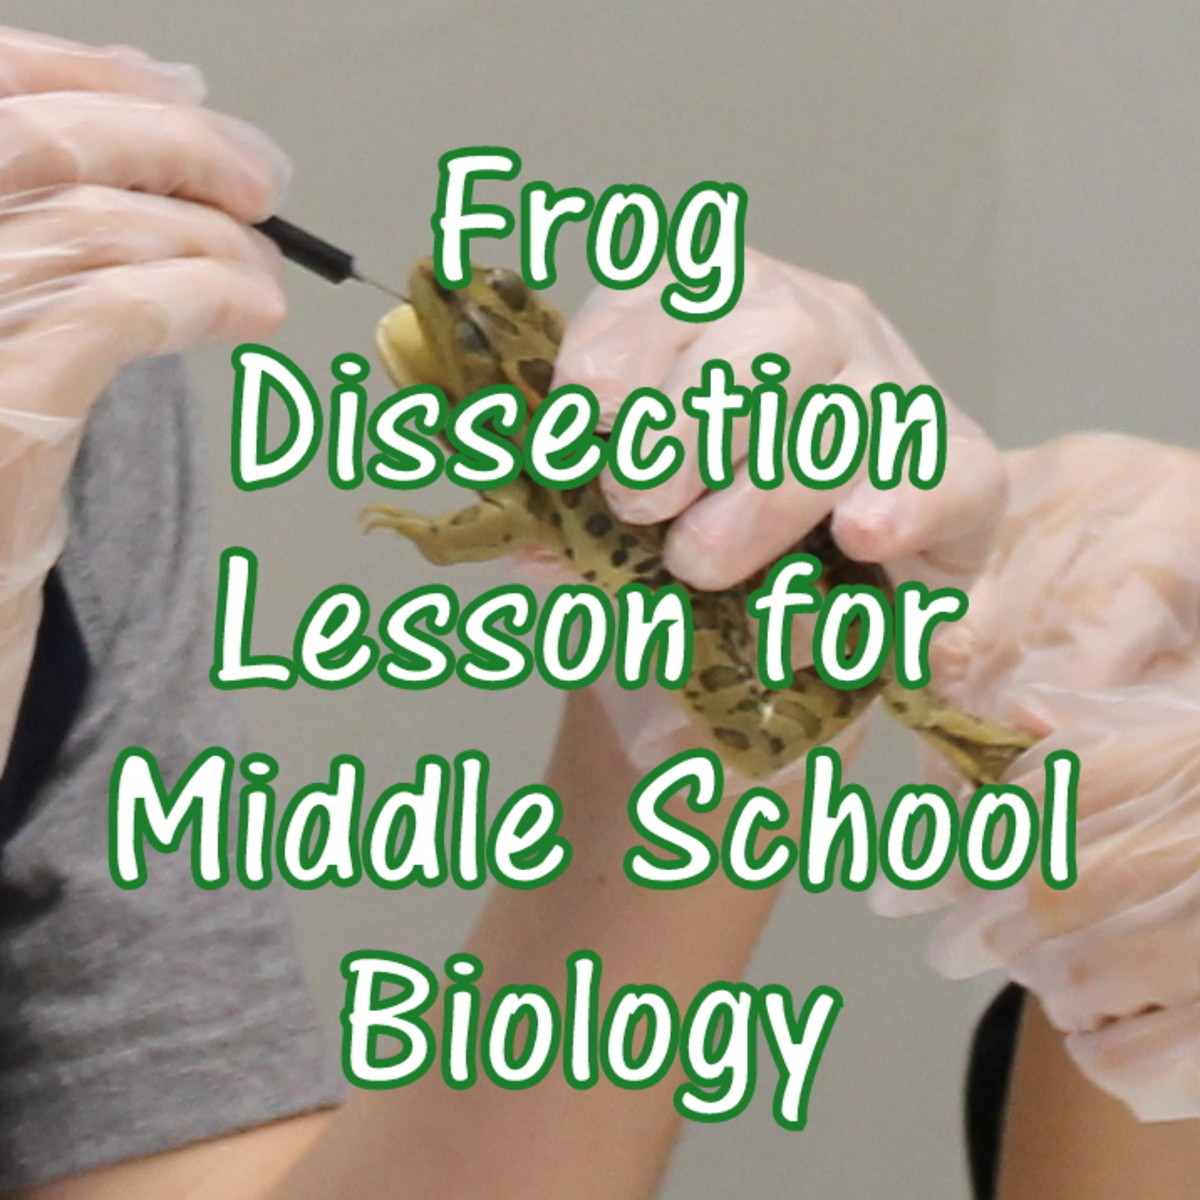 Frog Dissection Lesson for Middle School Biology